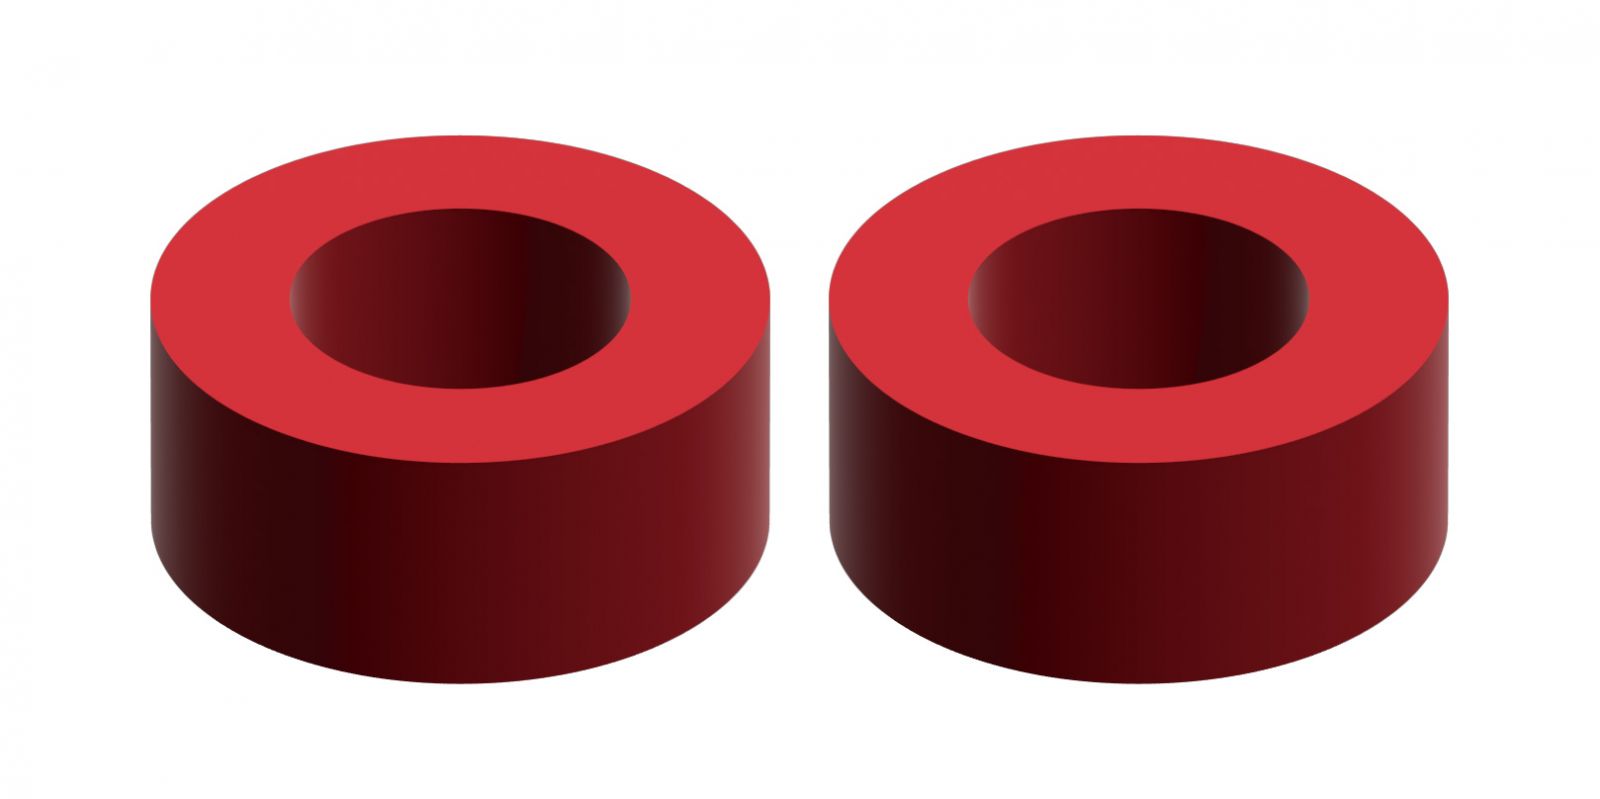 2 material-GOTREND Article-What does the color of the inductor ring mean? High conductivity ring